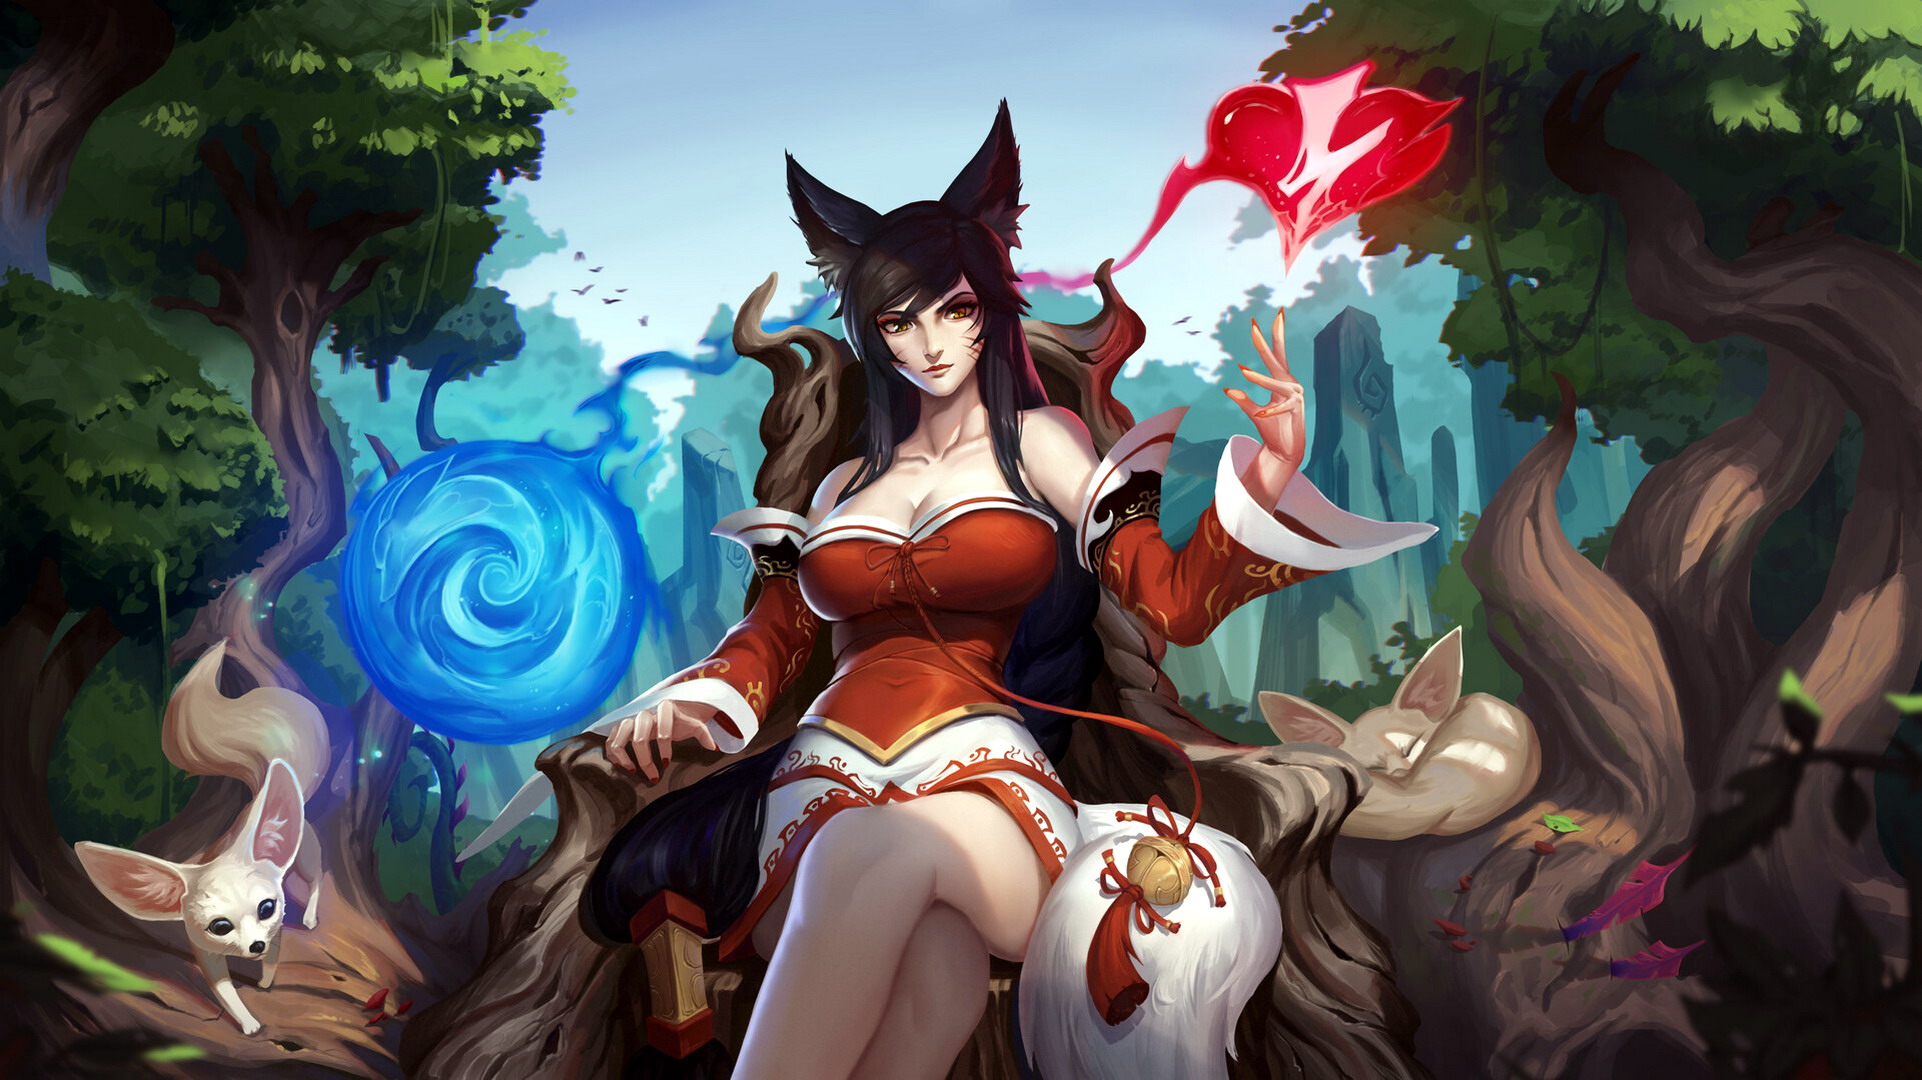 General 1922x1080 Ahri (League of Legends) League of Legends Unstable Anomaly video game characters digital art